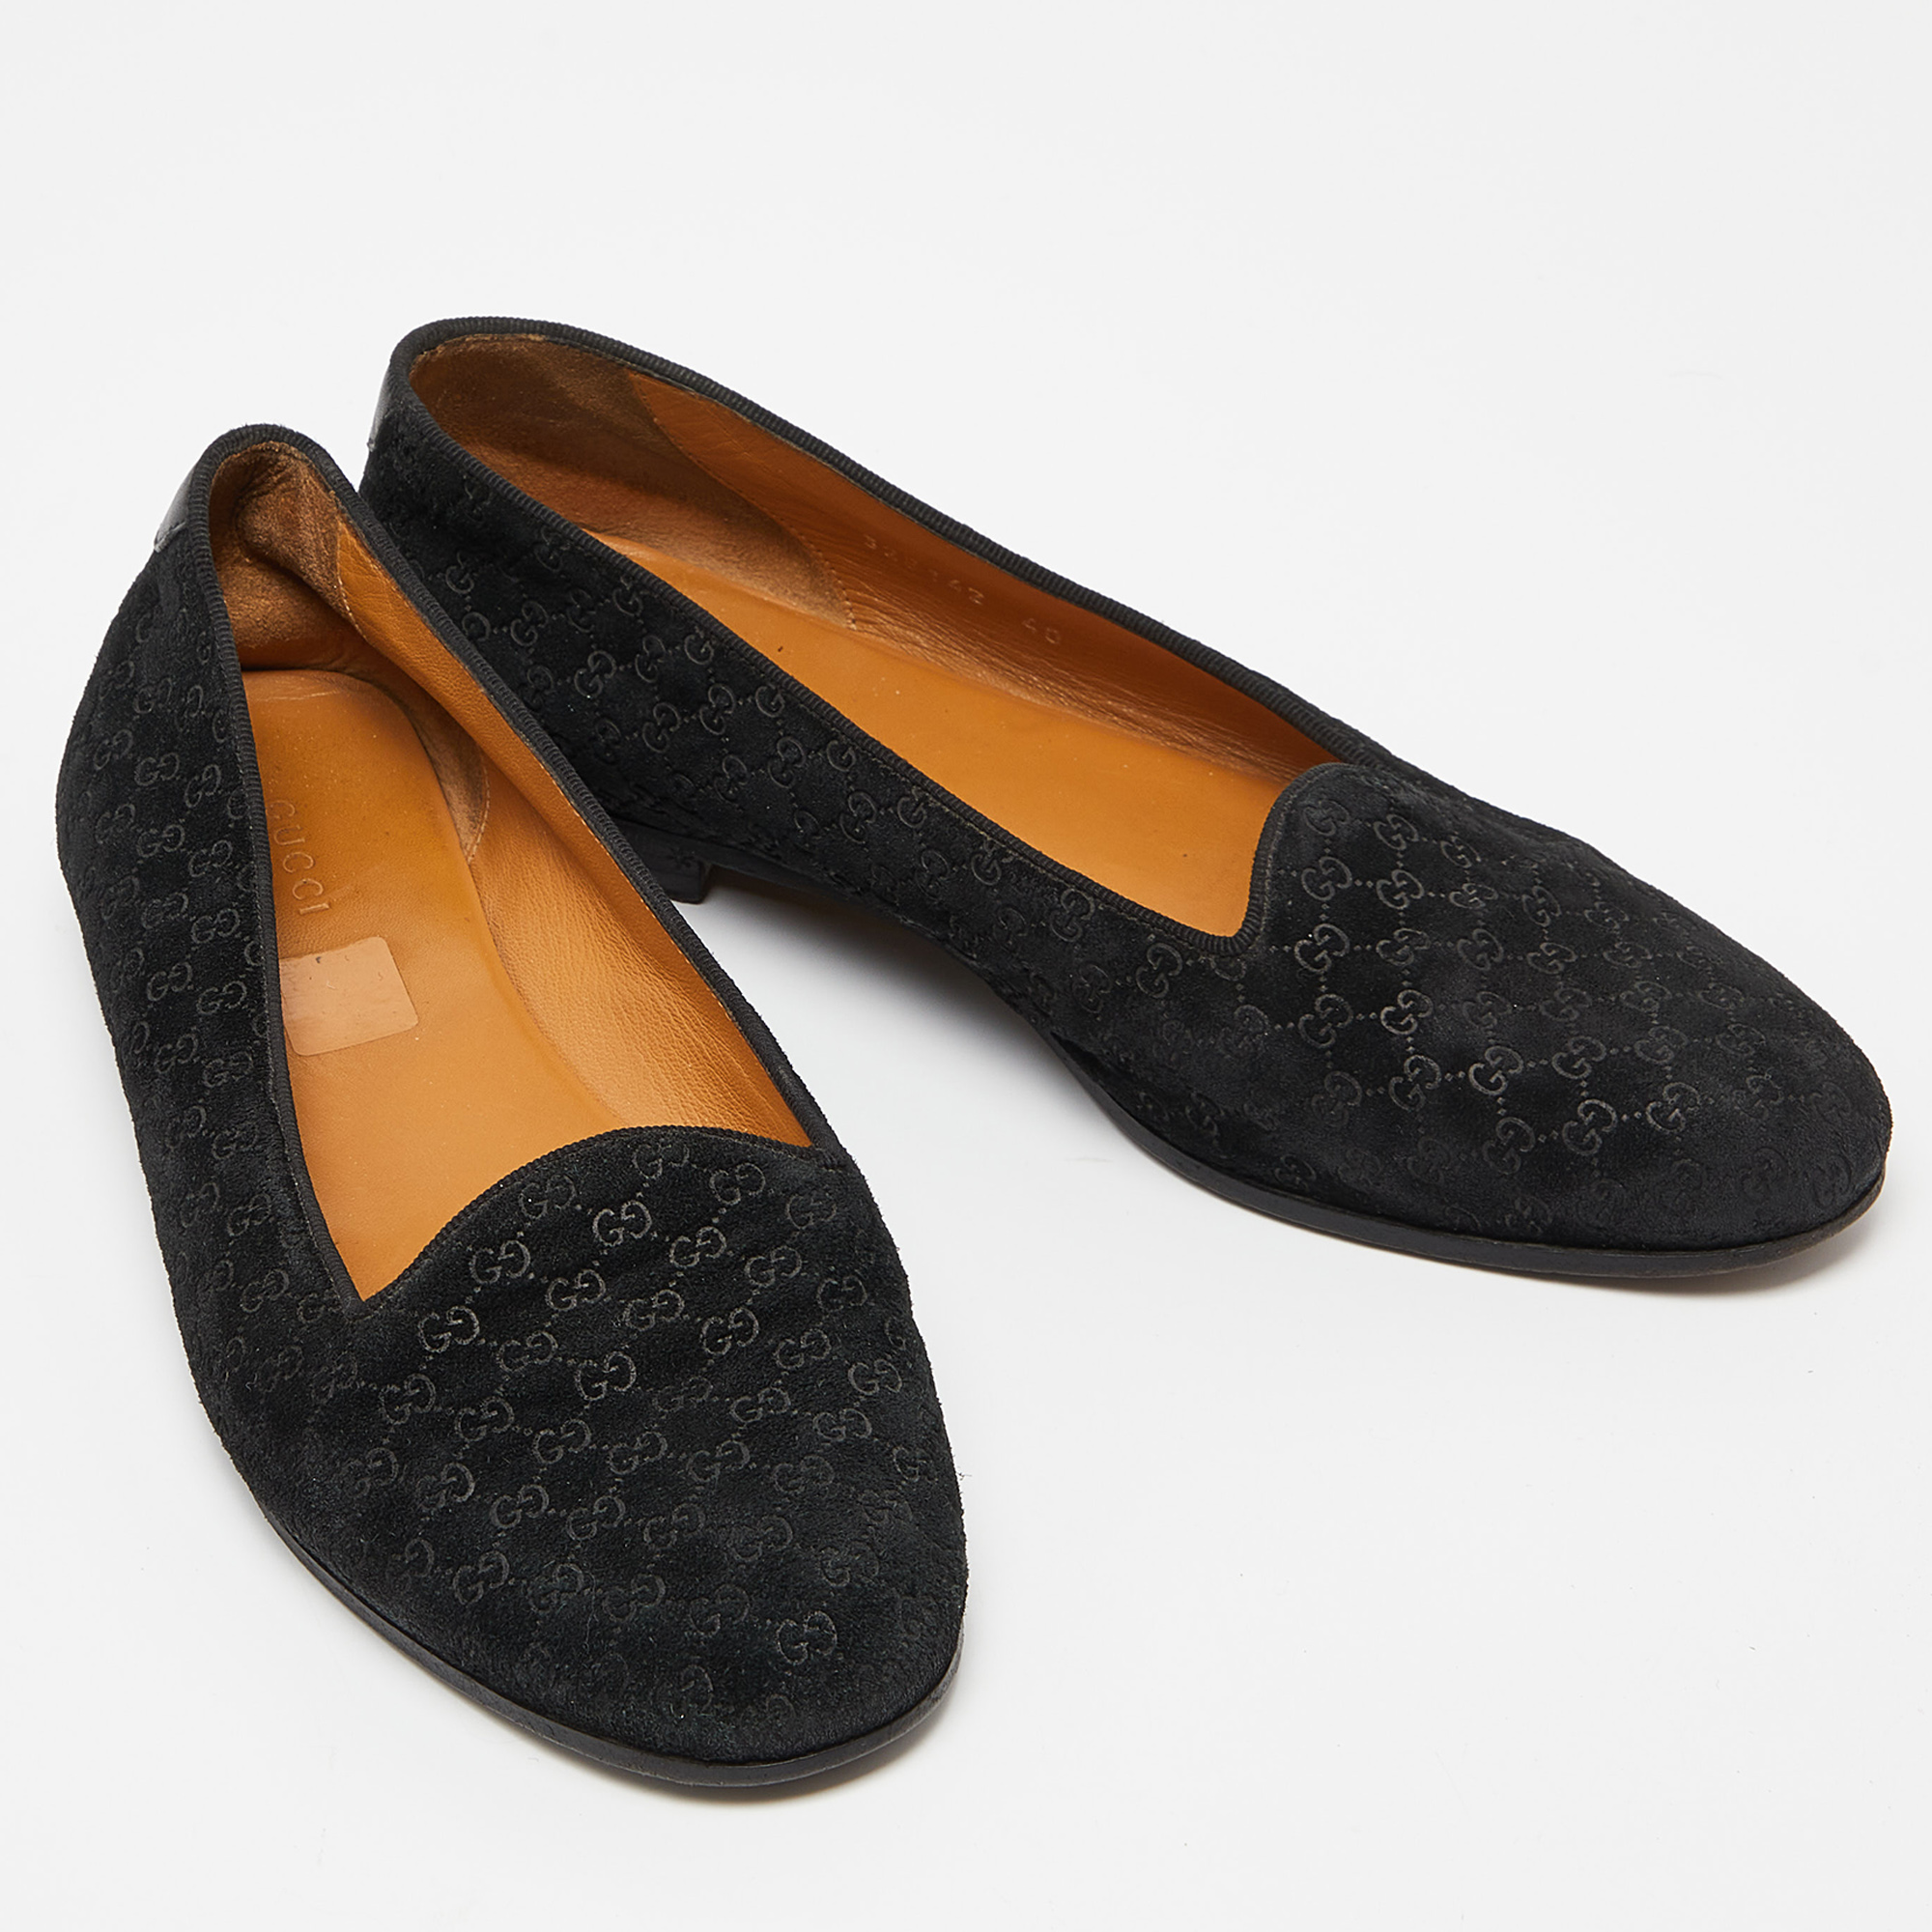 Gucci Black Microguccissima Suede Smoking Slippers Size 40